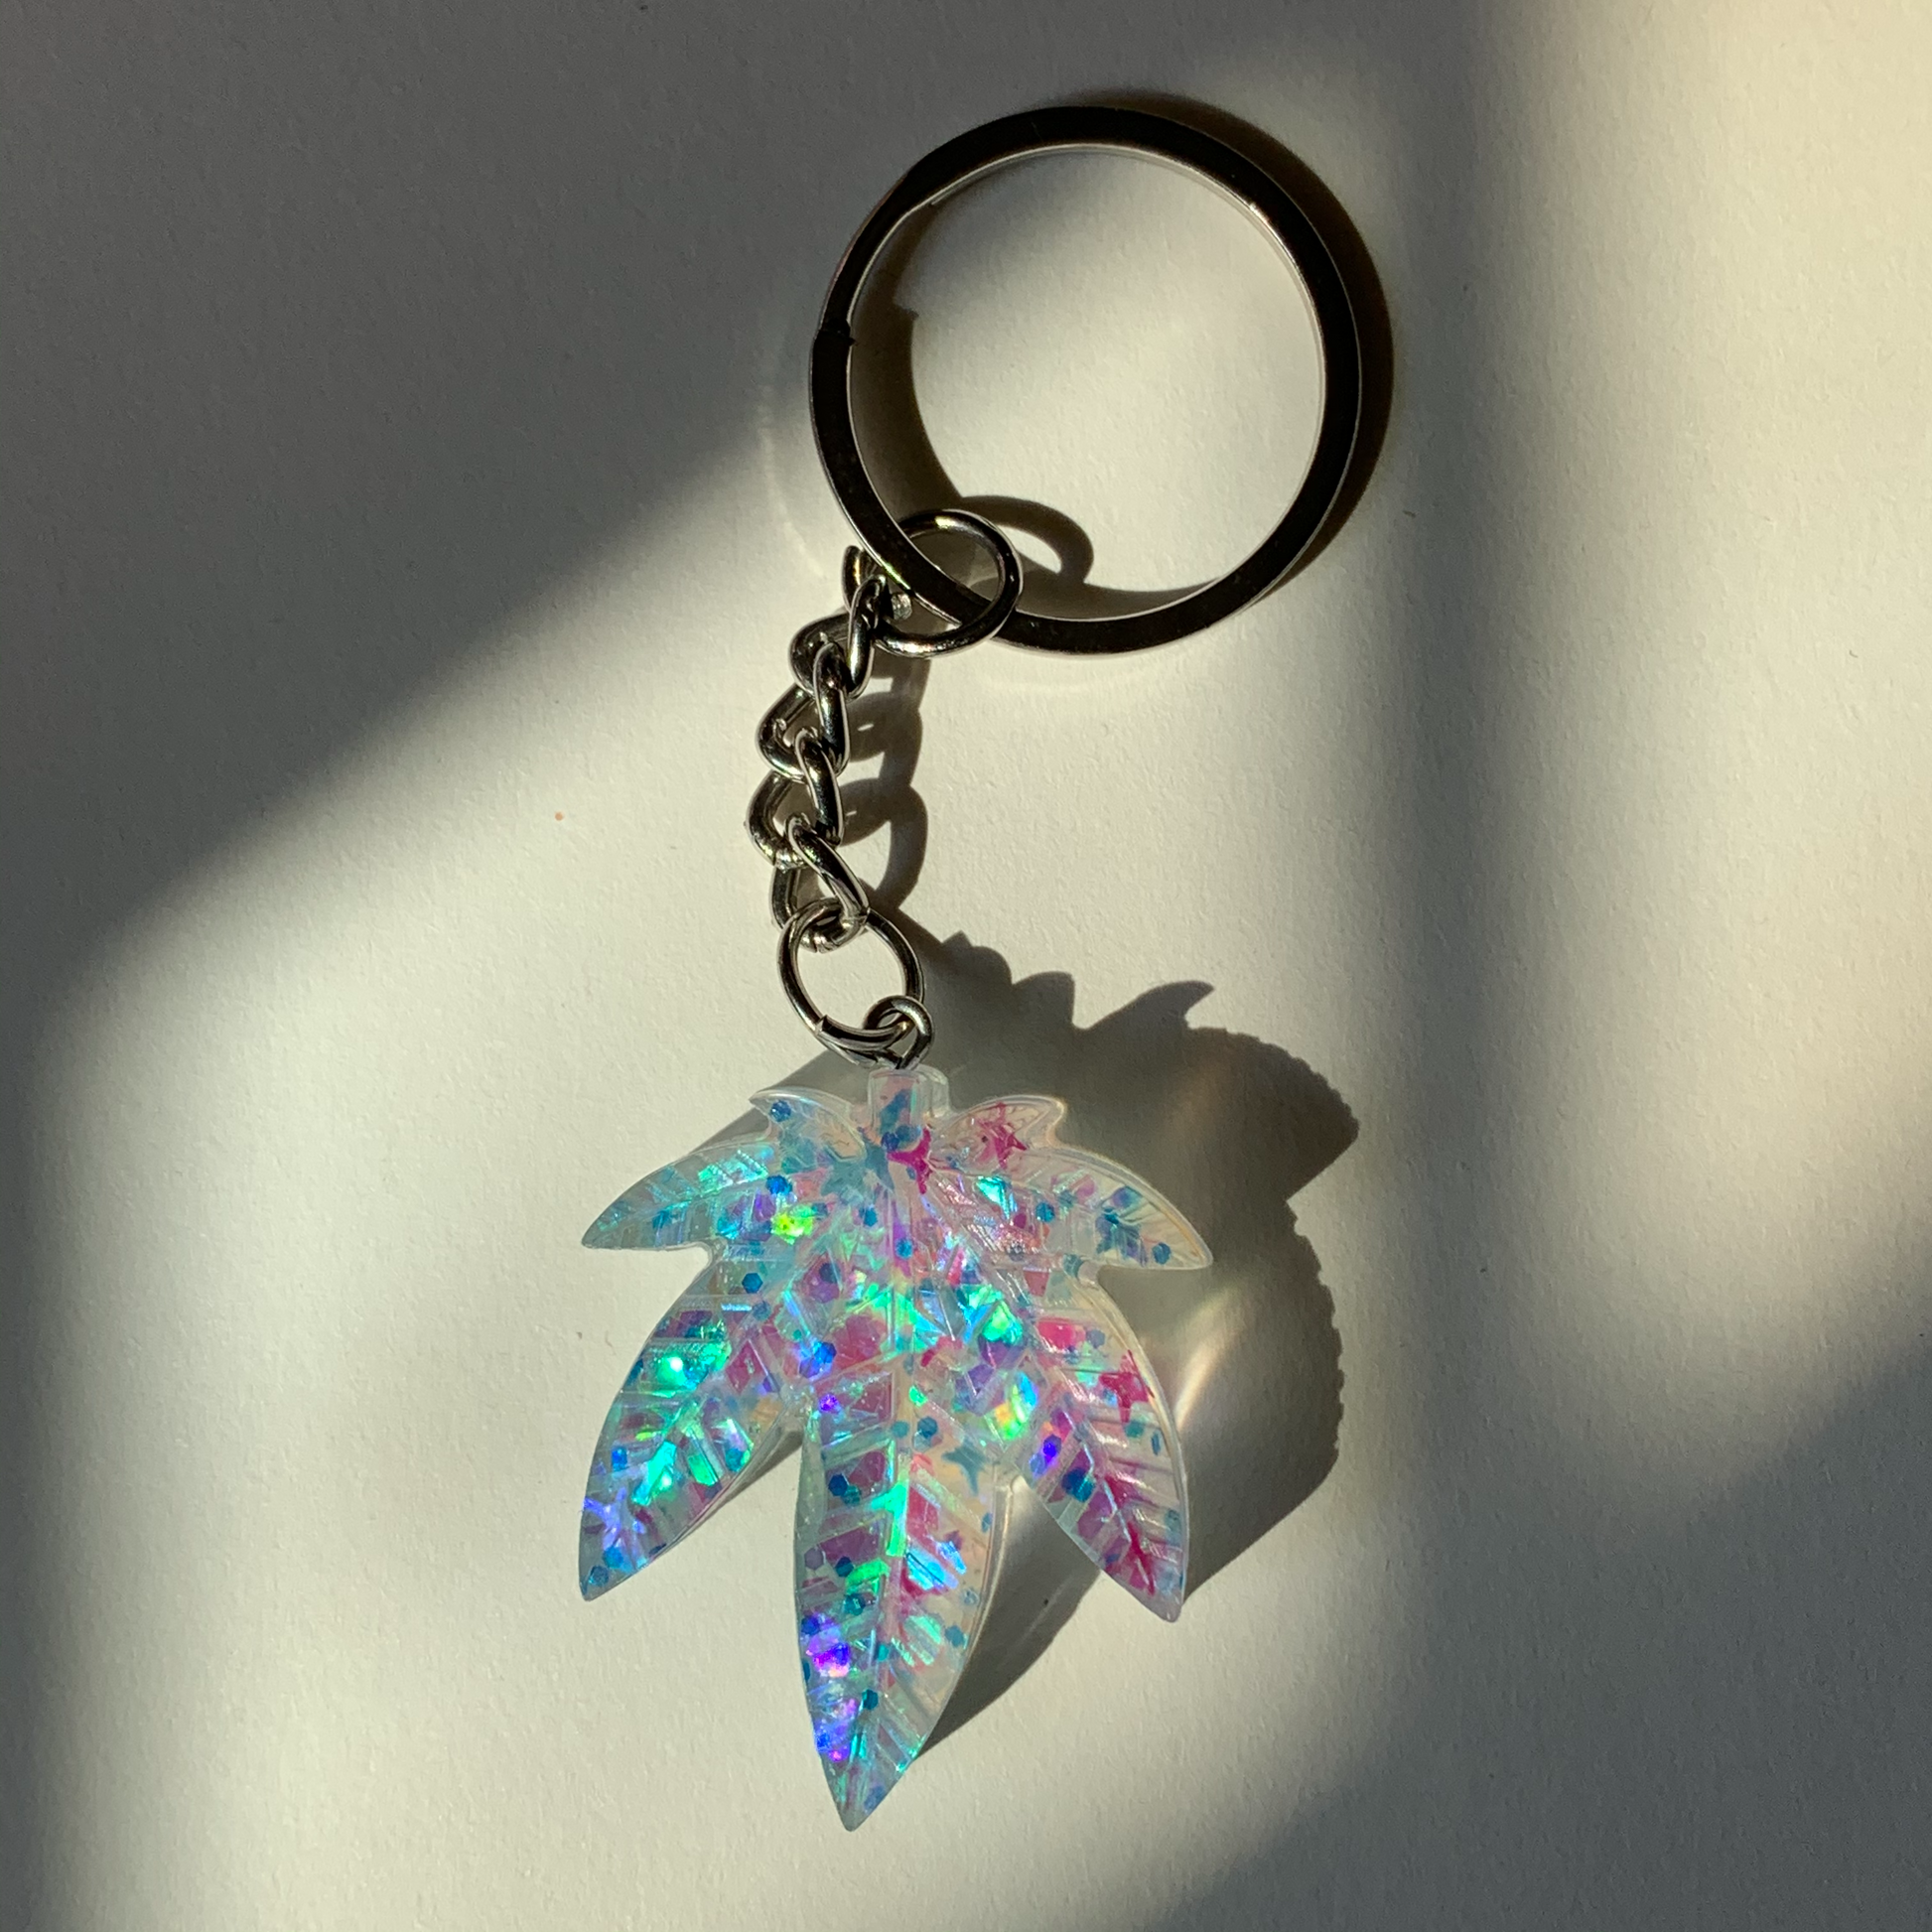 Keychains, resin, holographic, blue, Sparkle, orange, handmade, collection, green, light, pink, buynowwww.slimjim.in, shoponslimjim, keychain,